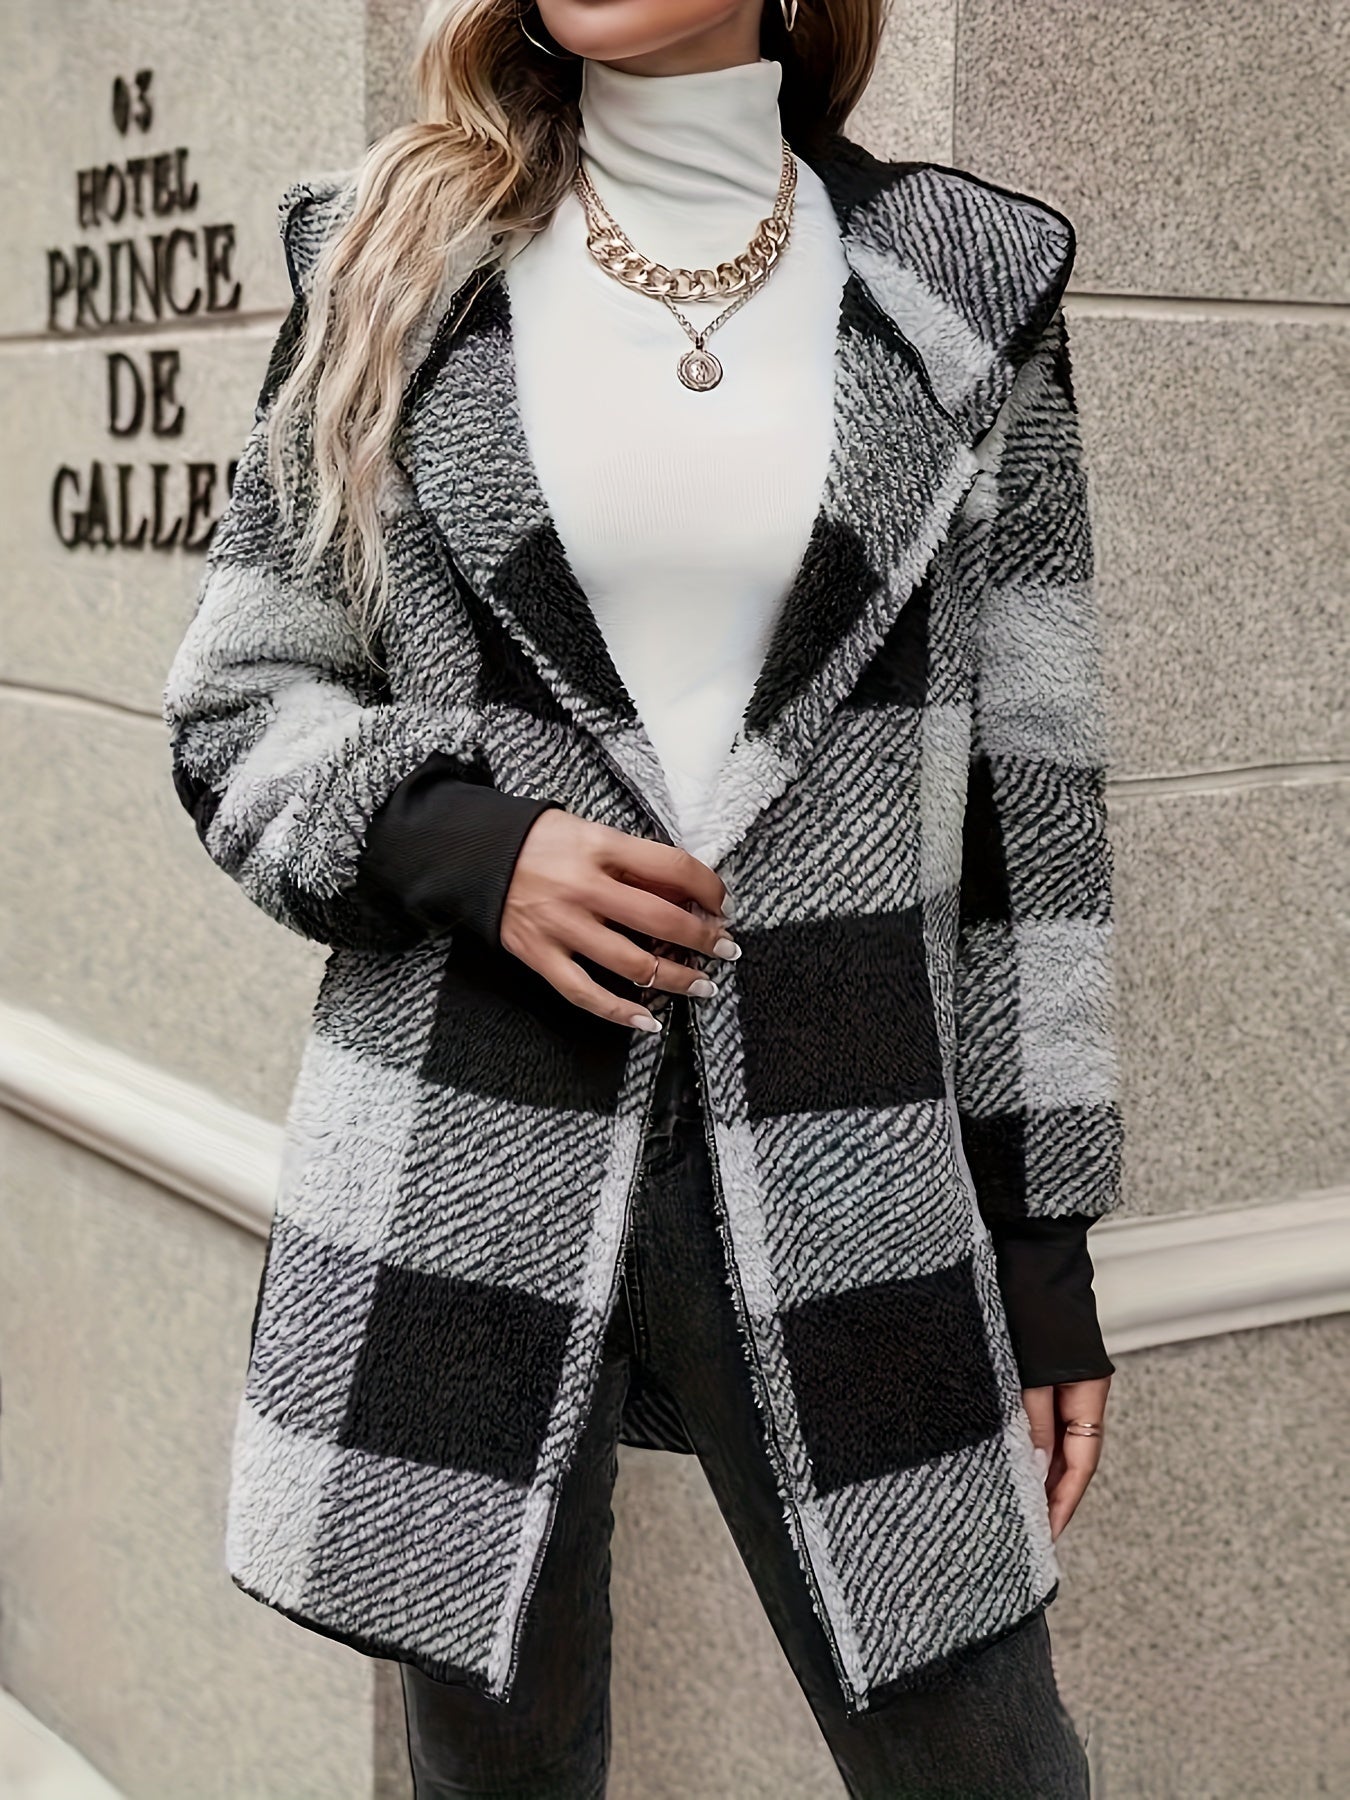 Plaid Pattern Open Front Hooded Coat, Versatile Long Sleeve Thermal Winter Outwear, Women's Clothing